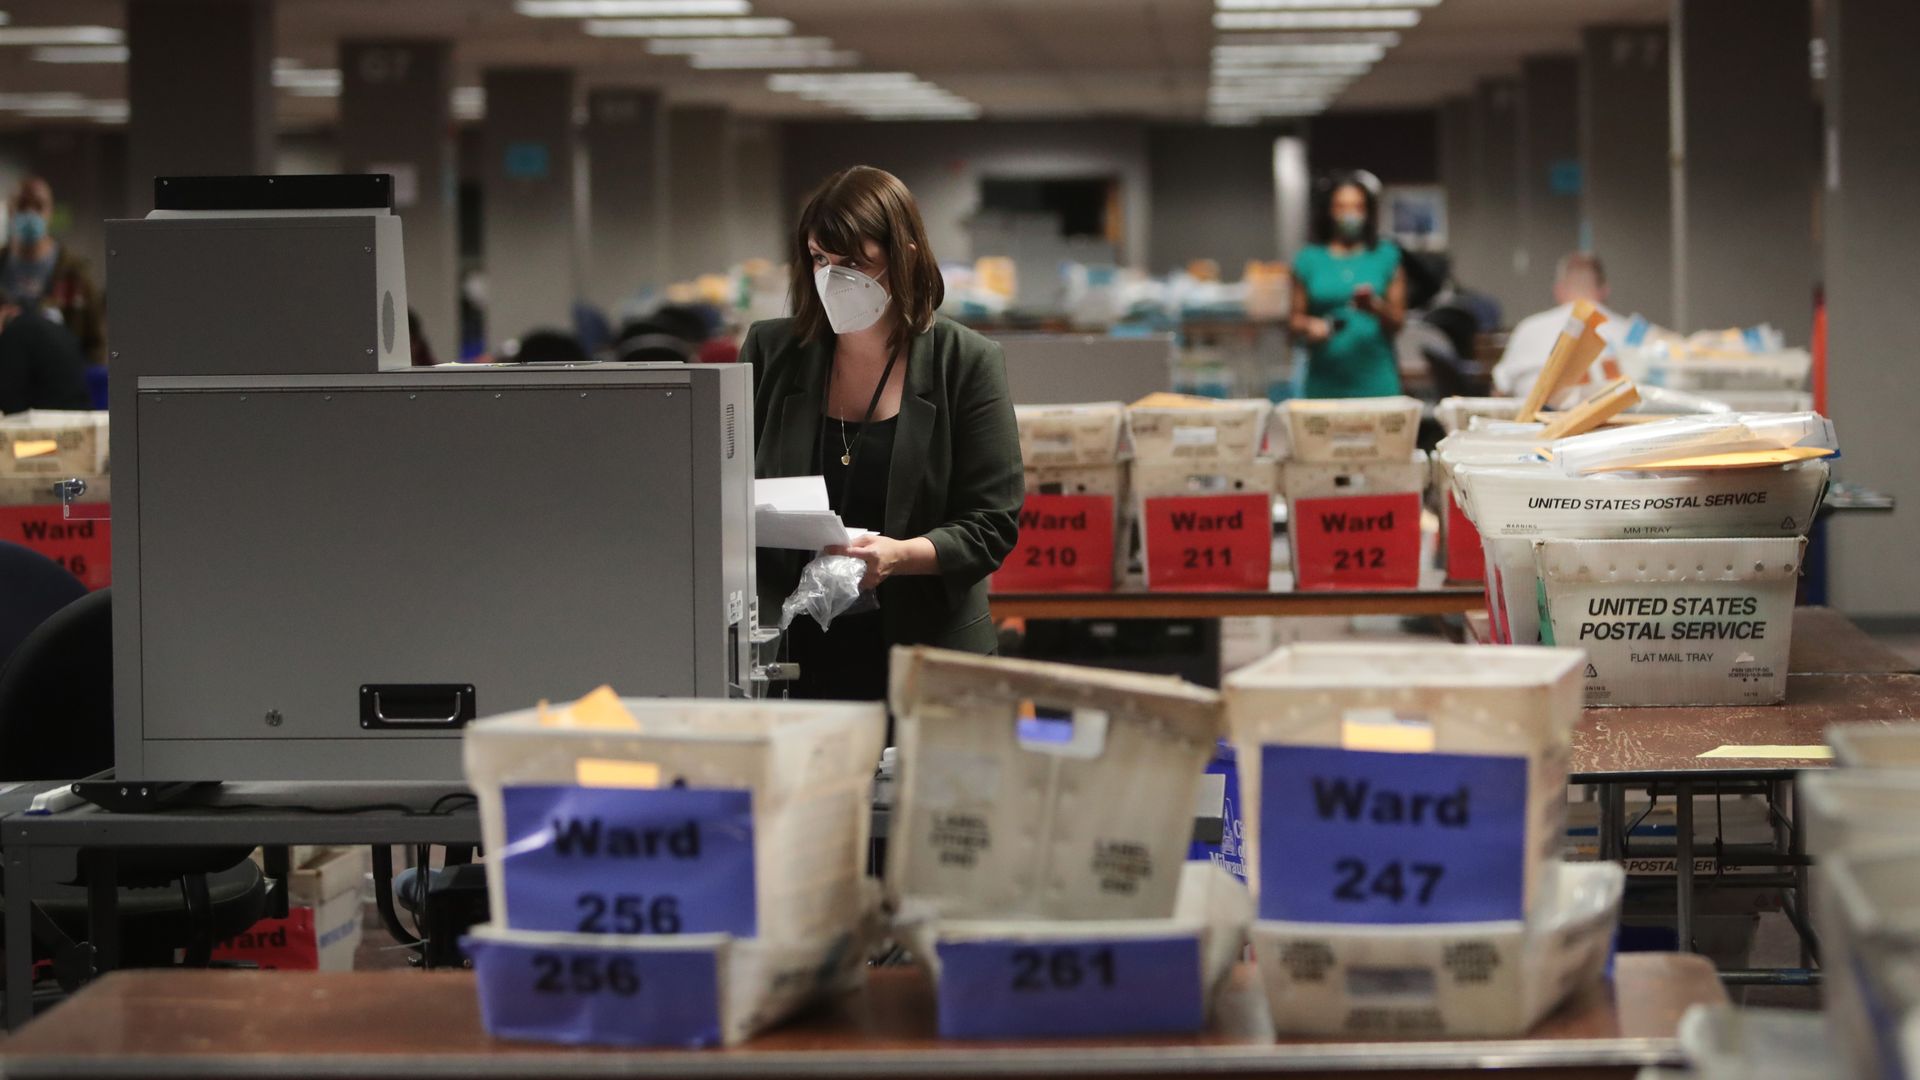 Claire Woodall-Vogg, executive director of the Milwaukee election commission collects the count from absentee ballots from a voting machine on November 04, 2020 in Milwaukee, Wisconsin.